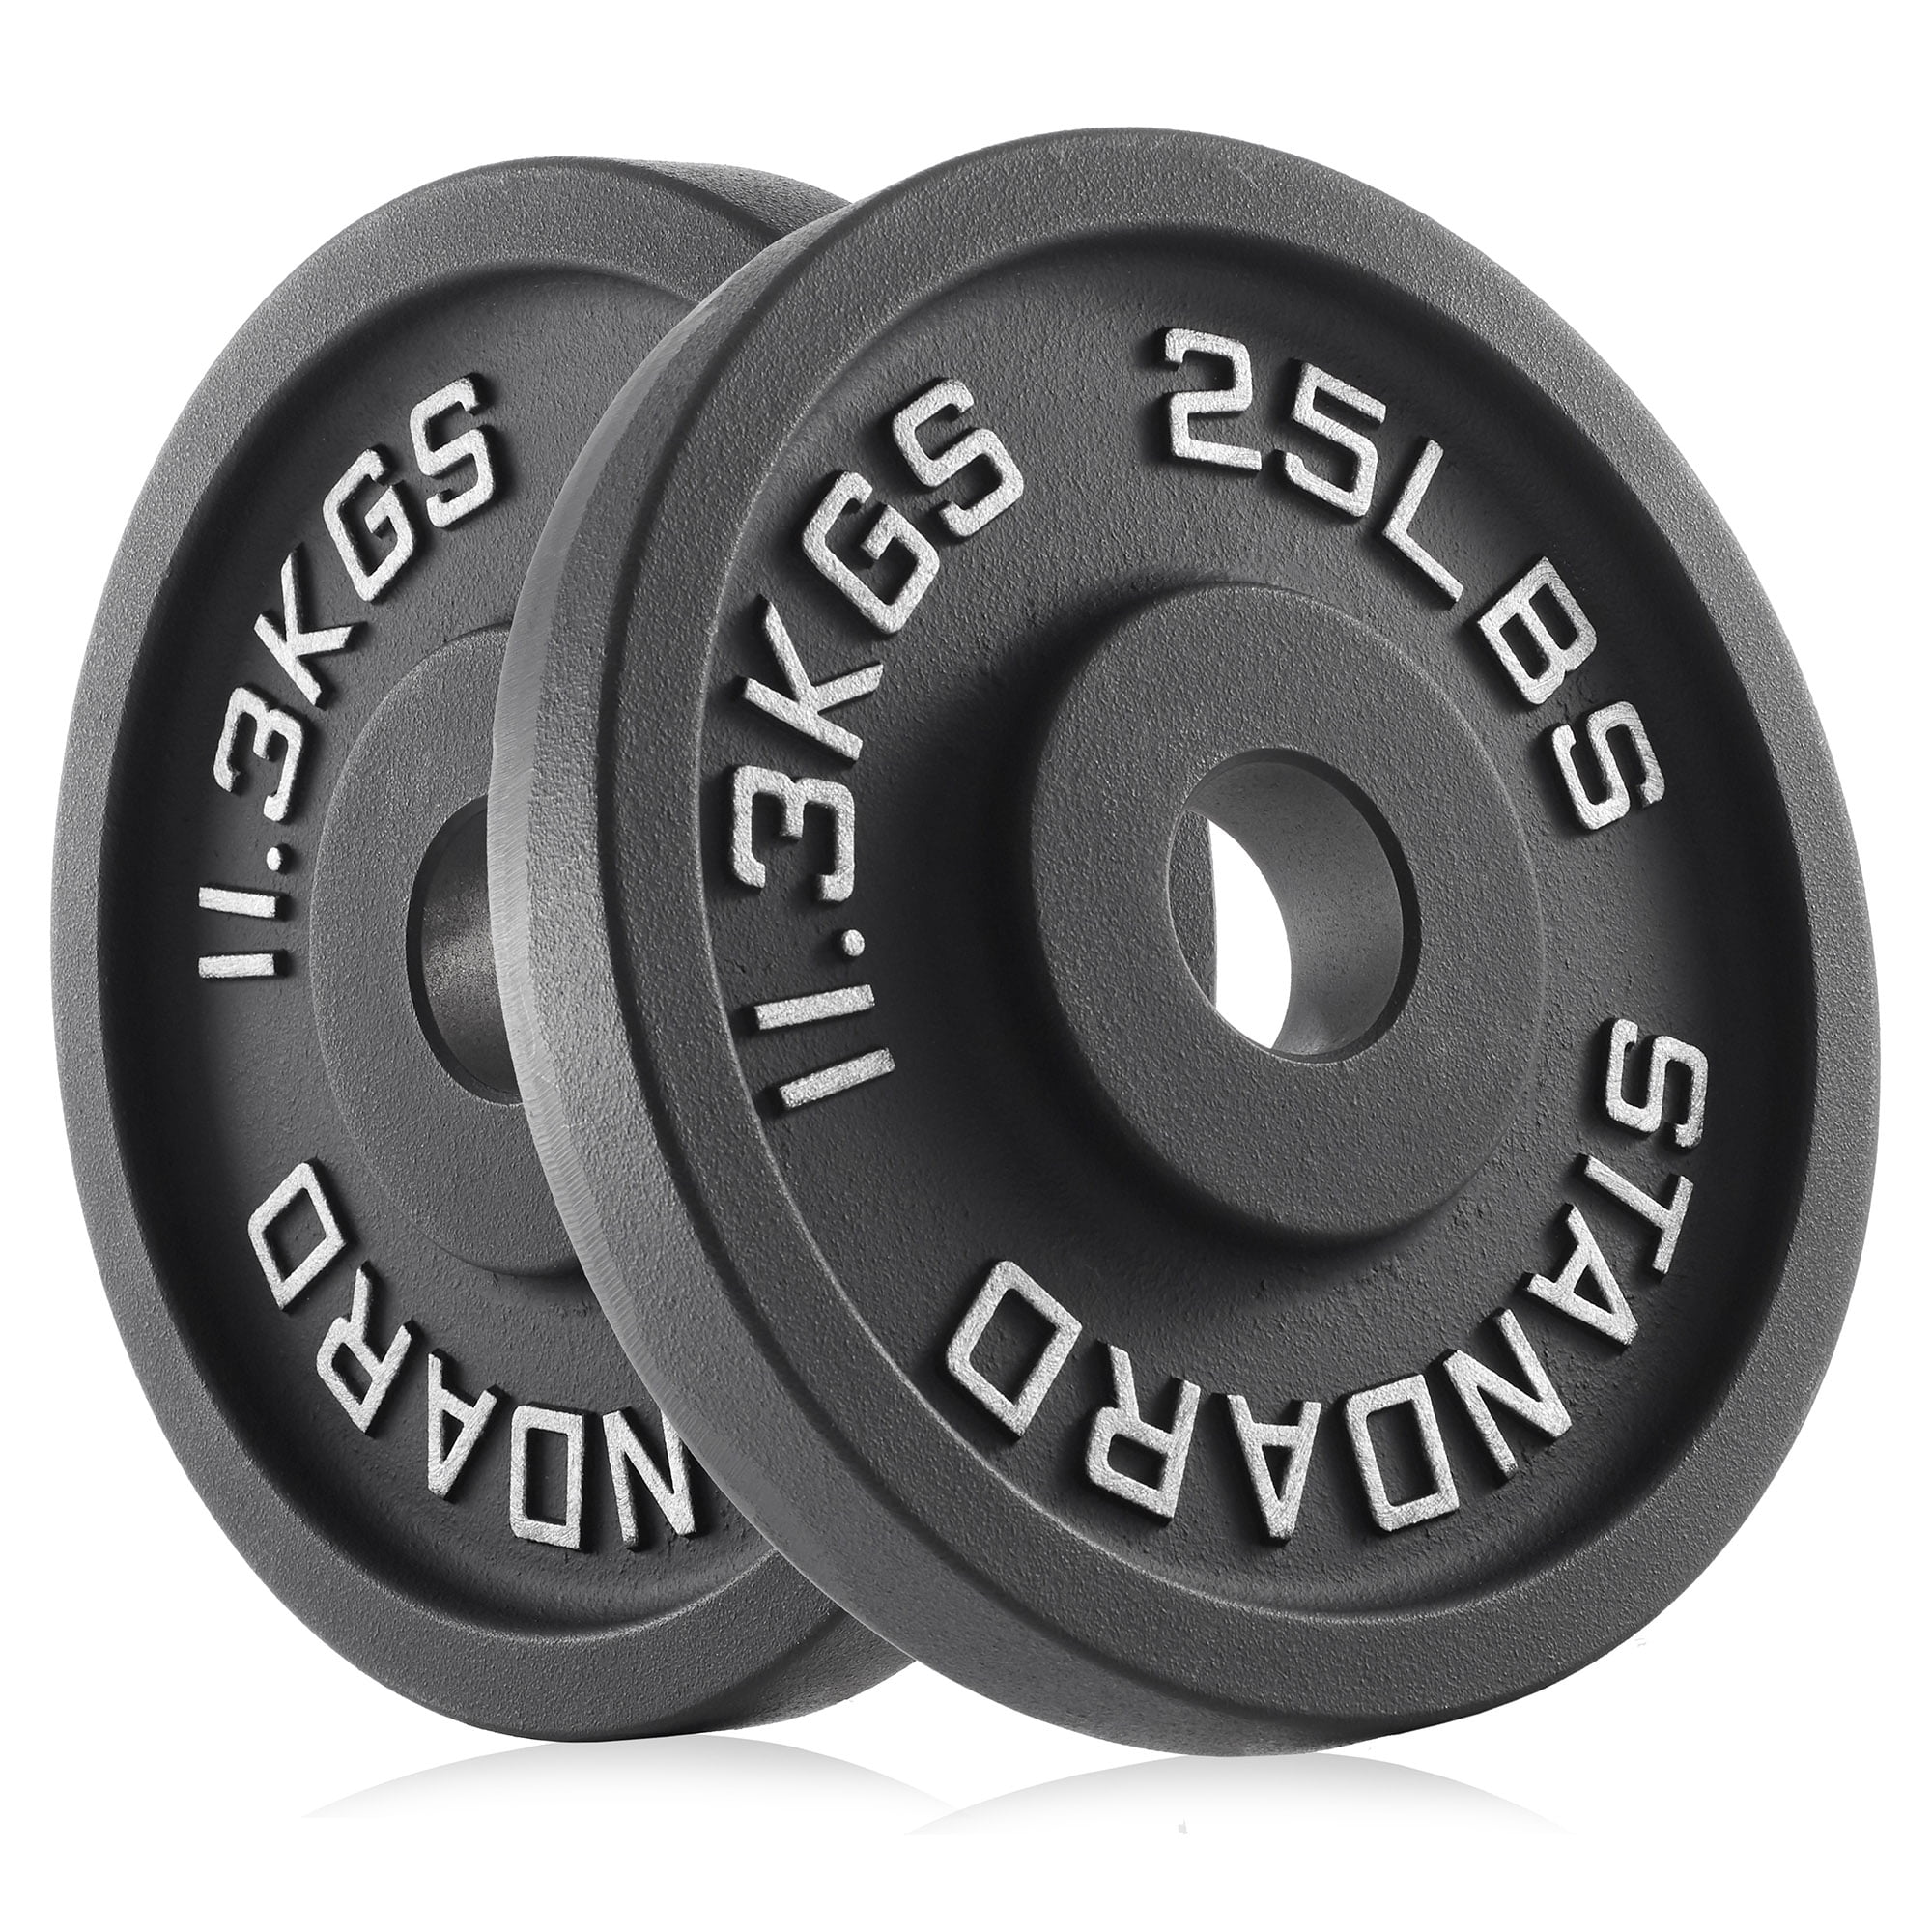 2 5.5 lb 2.2 kg International Olympic 2" hole Weight Plates 11 lb Total WEIDER 